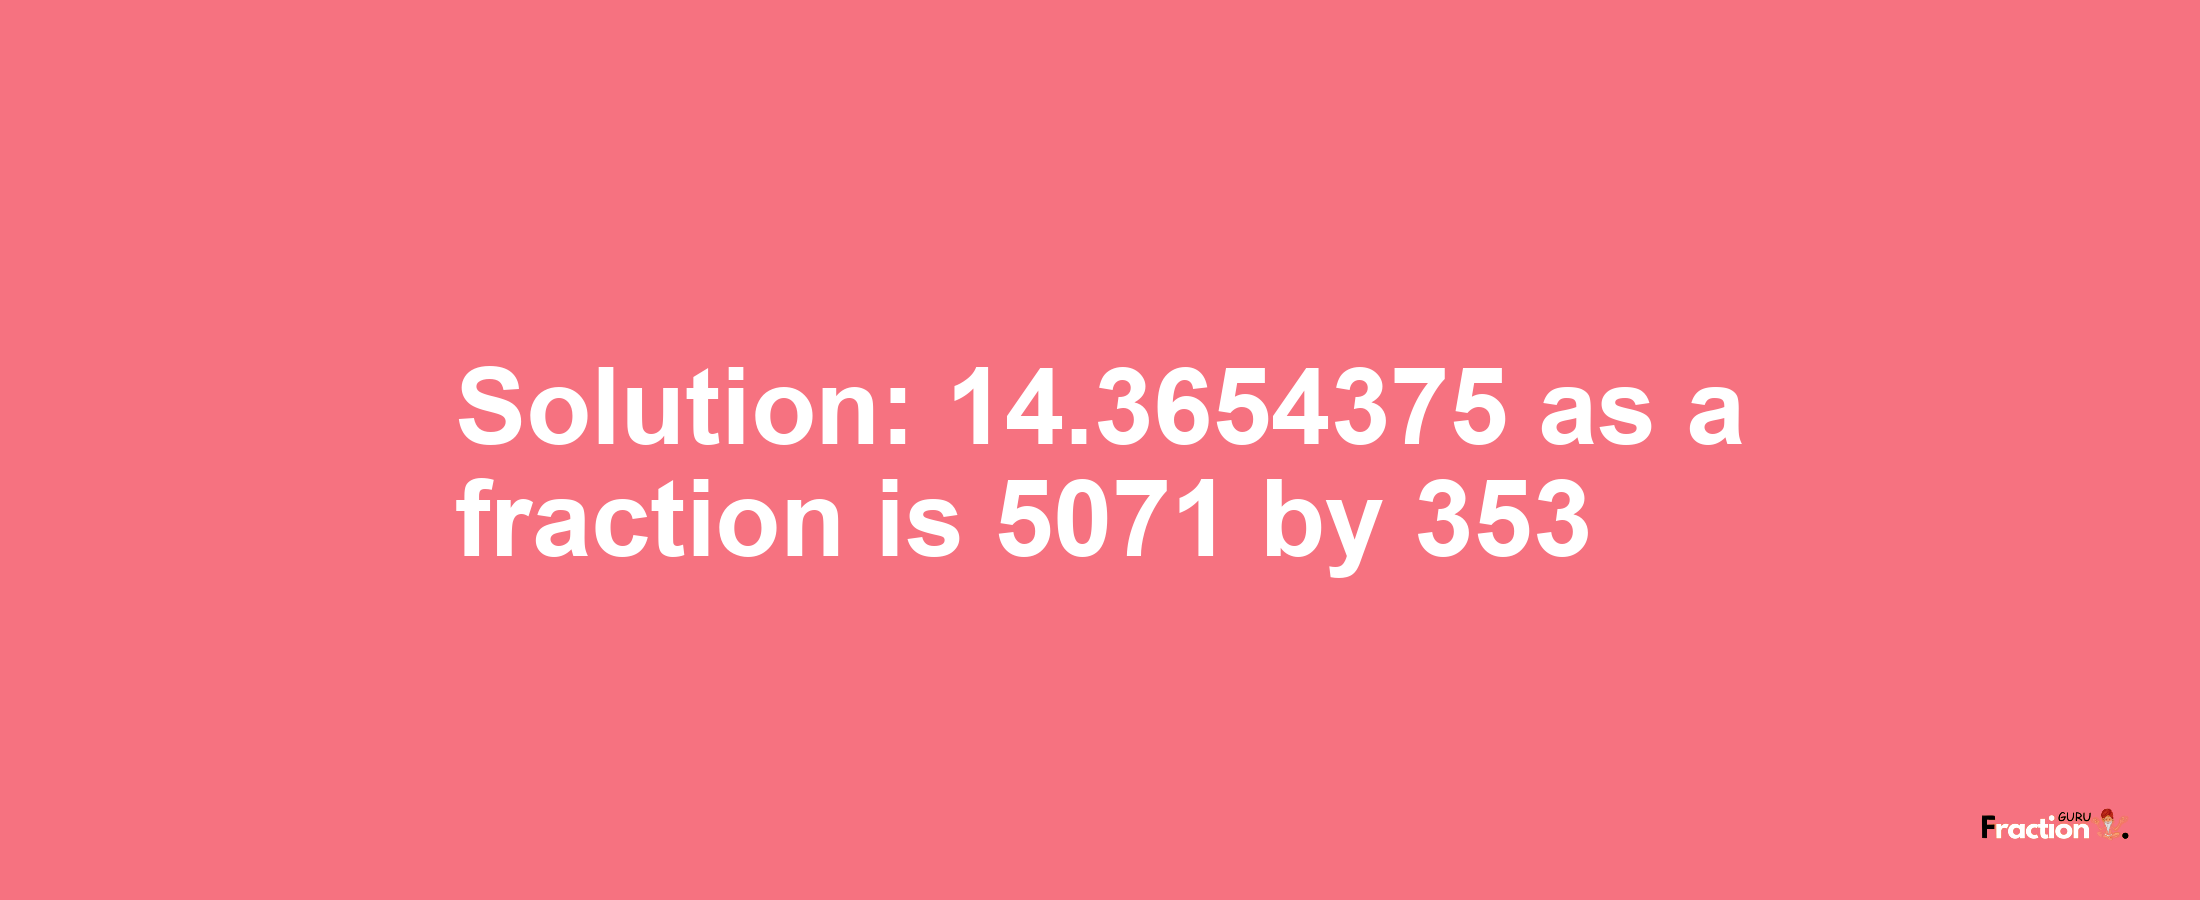 Solution:14.3654375 as a fraction is 5071/353